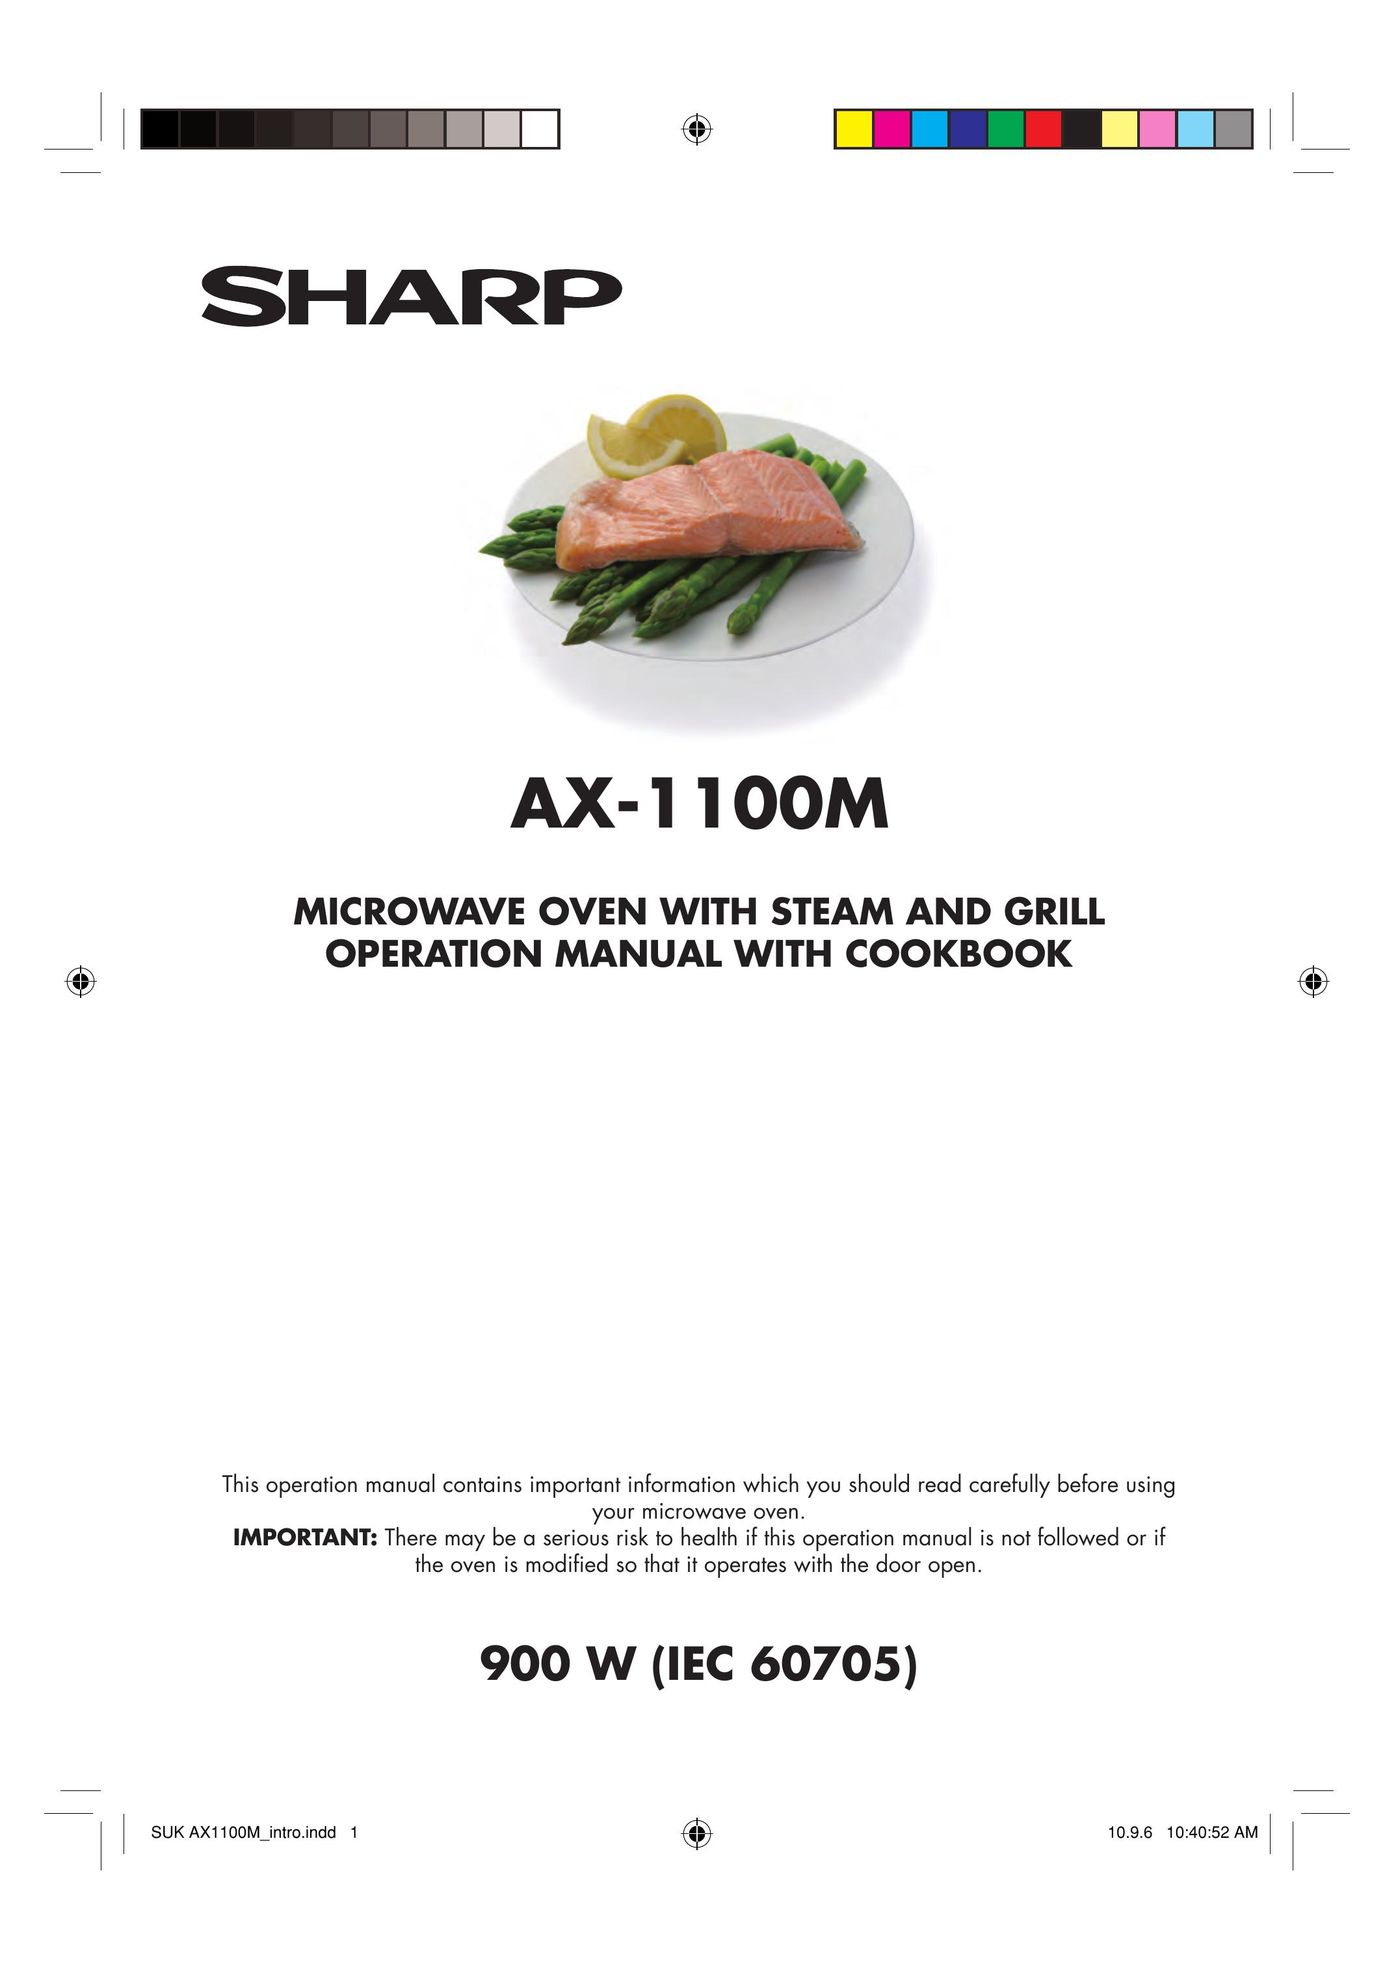 Sharp AX-1100M Microwave Oven User Manual